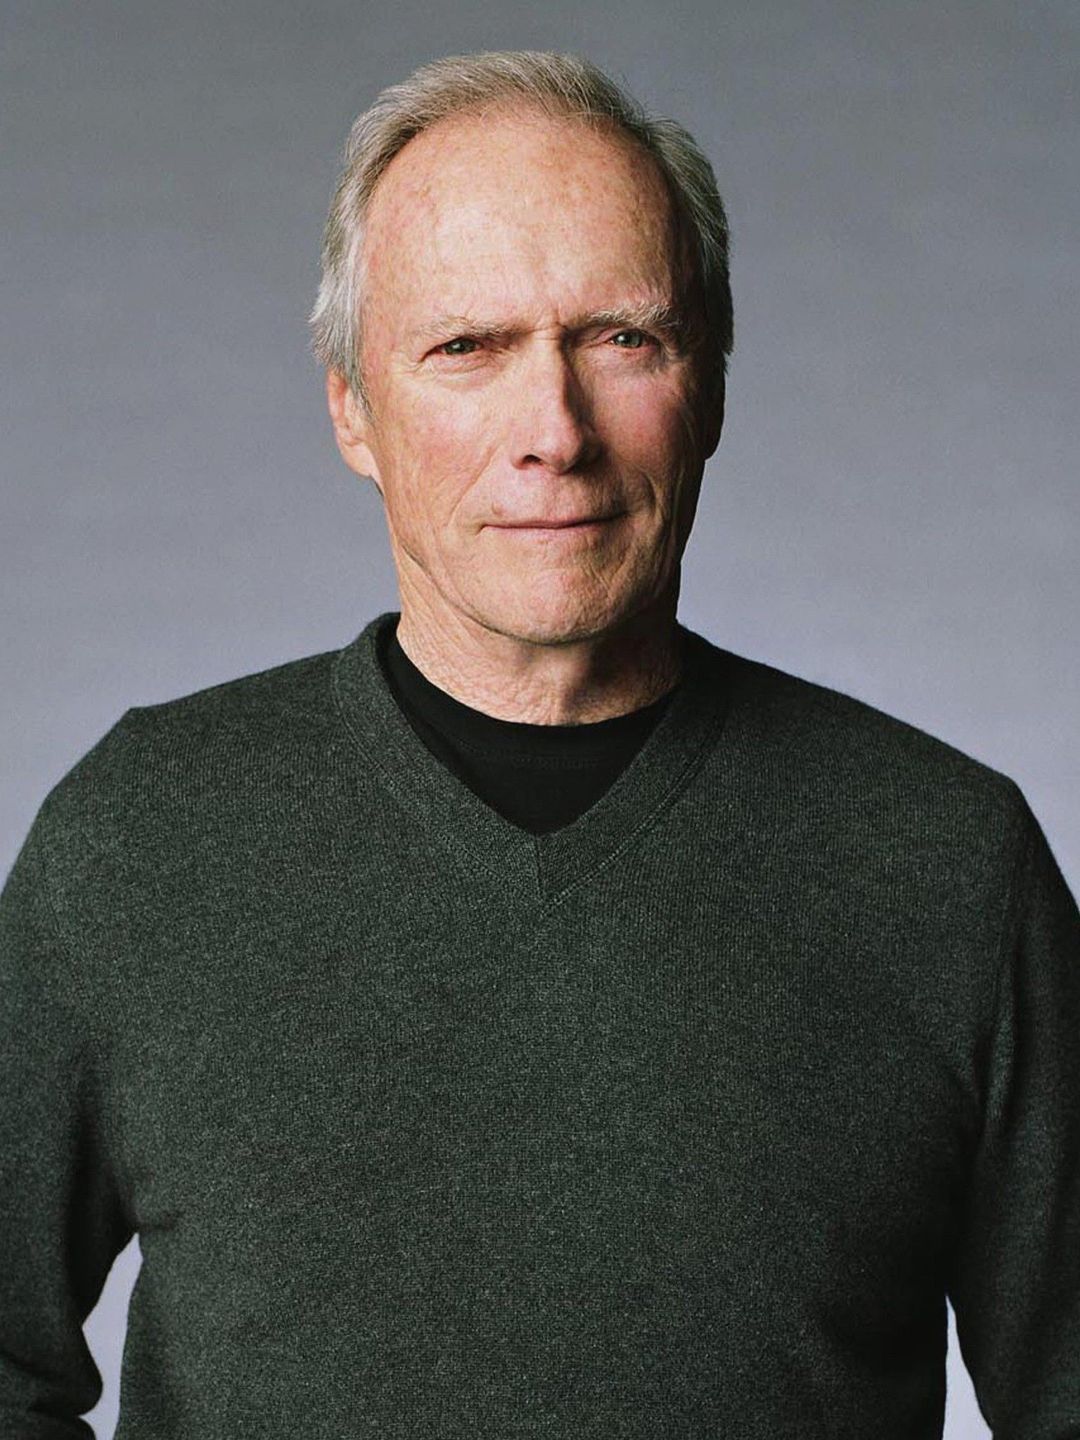 Clint Eastwood does he have a wife